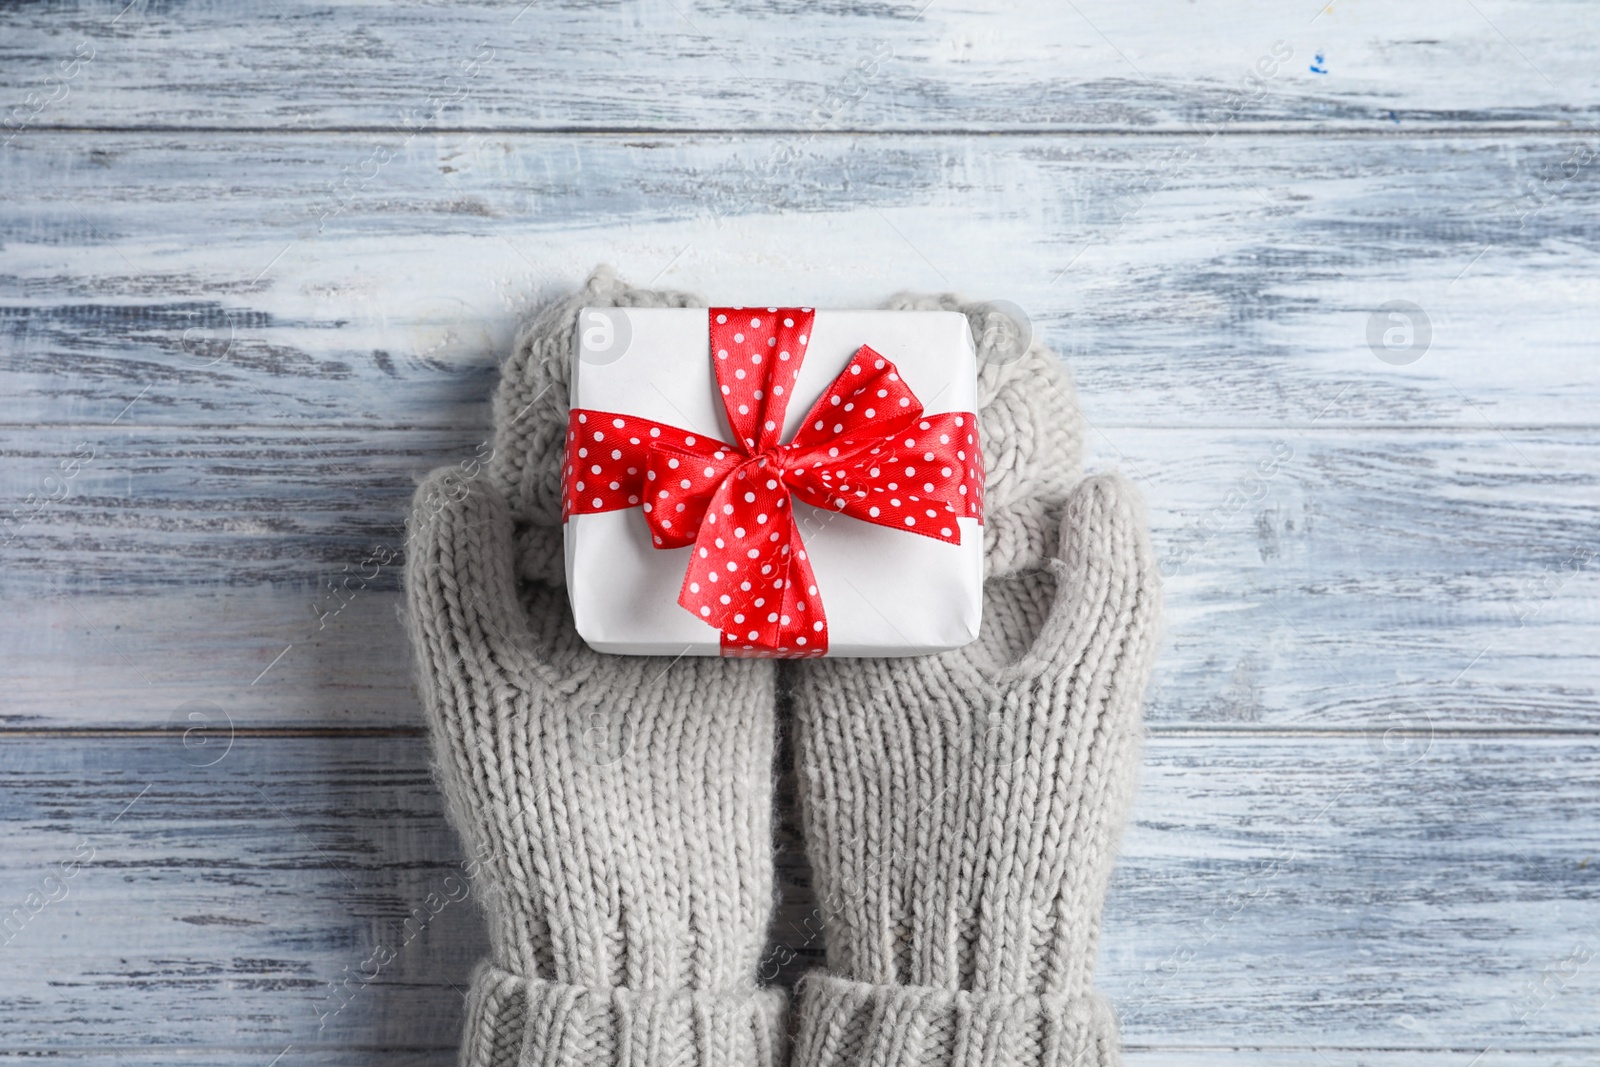 Photo of Woman wearing warm mittens holding Christmas gift on wooden background, top view